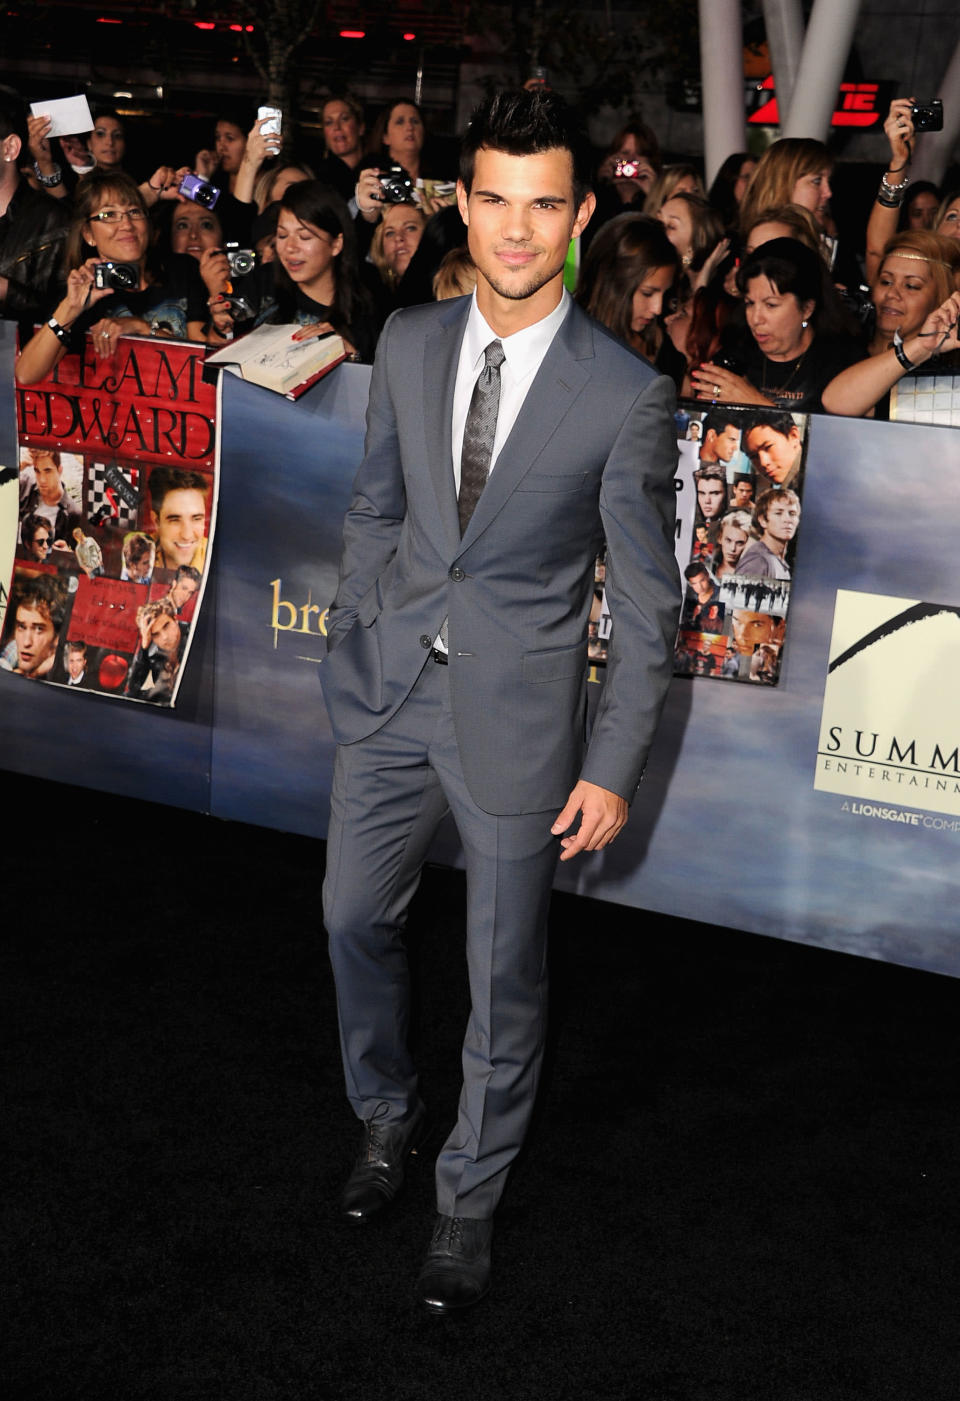 Taylor Lautner wore a two-button suit by Z Zegna. <br><br>Taylor Lautner arrives at "The Twilight Saga: Breaking Dawn - Part 2" Los Angeles premiere at Nokia Theatre L.A. Live on November 12, 2012 in Los Angeles, California. (Photo by Steve Granitz/WireImage)